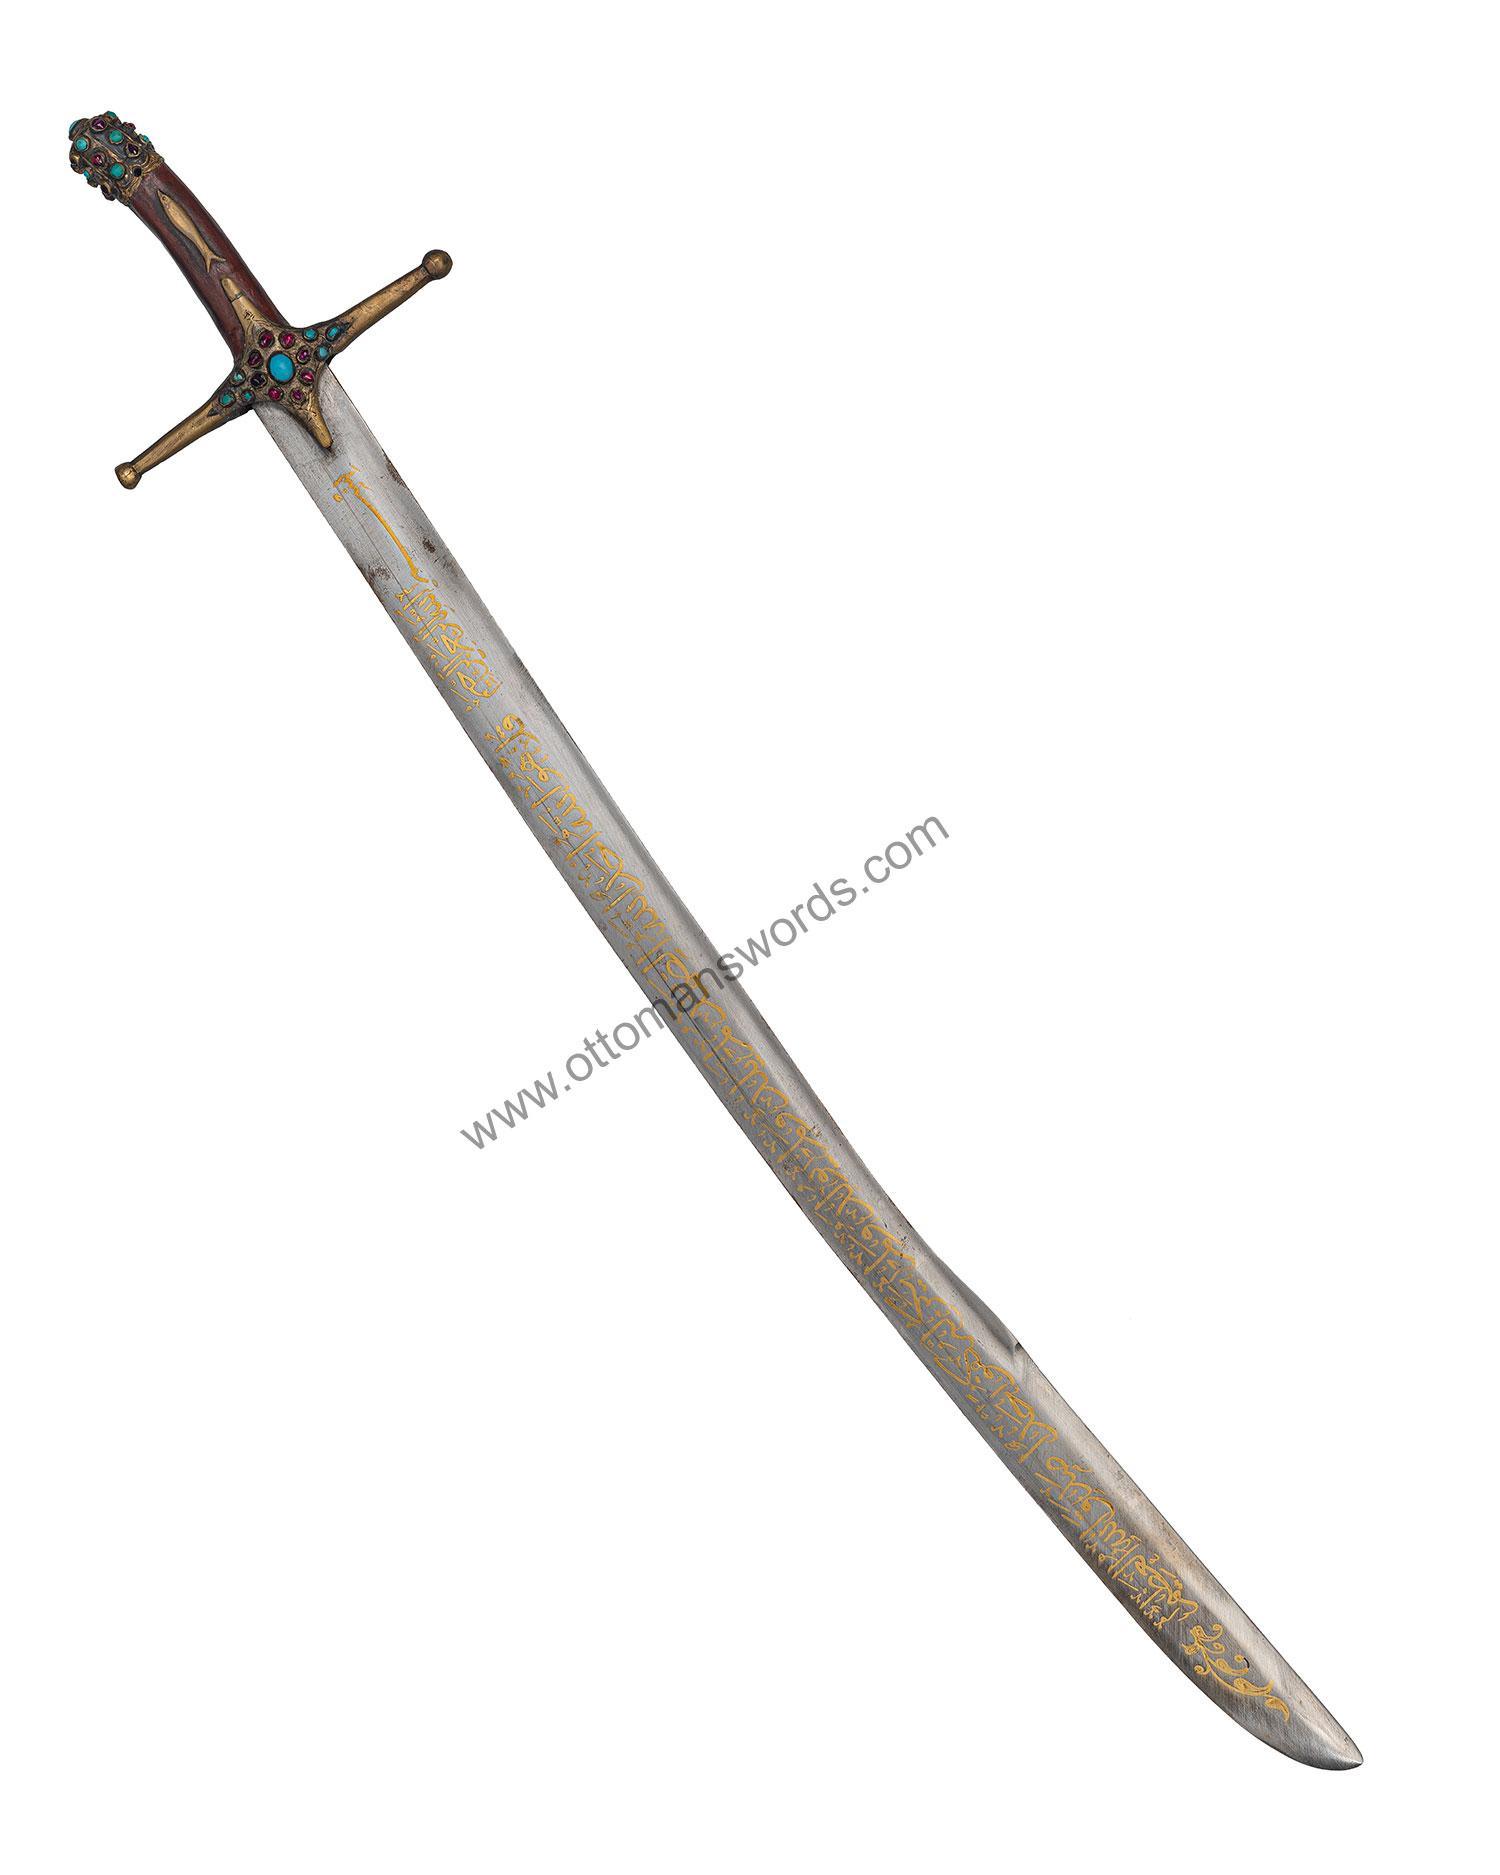 Sword of Suleiman the Magnificent (4)